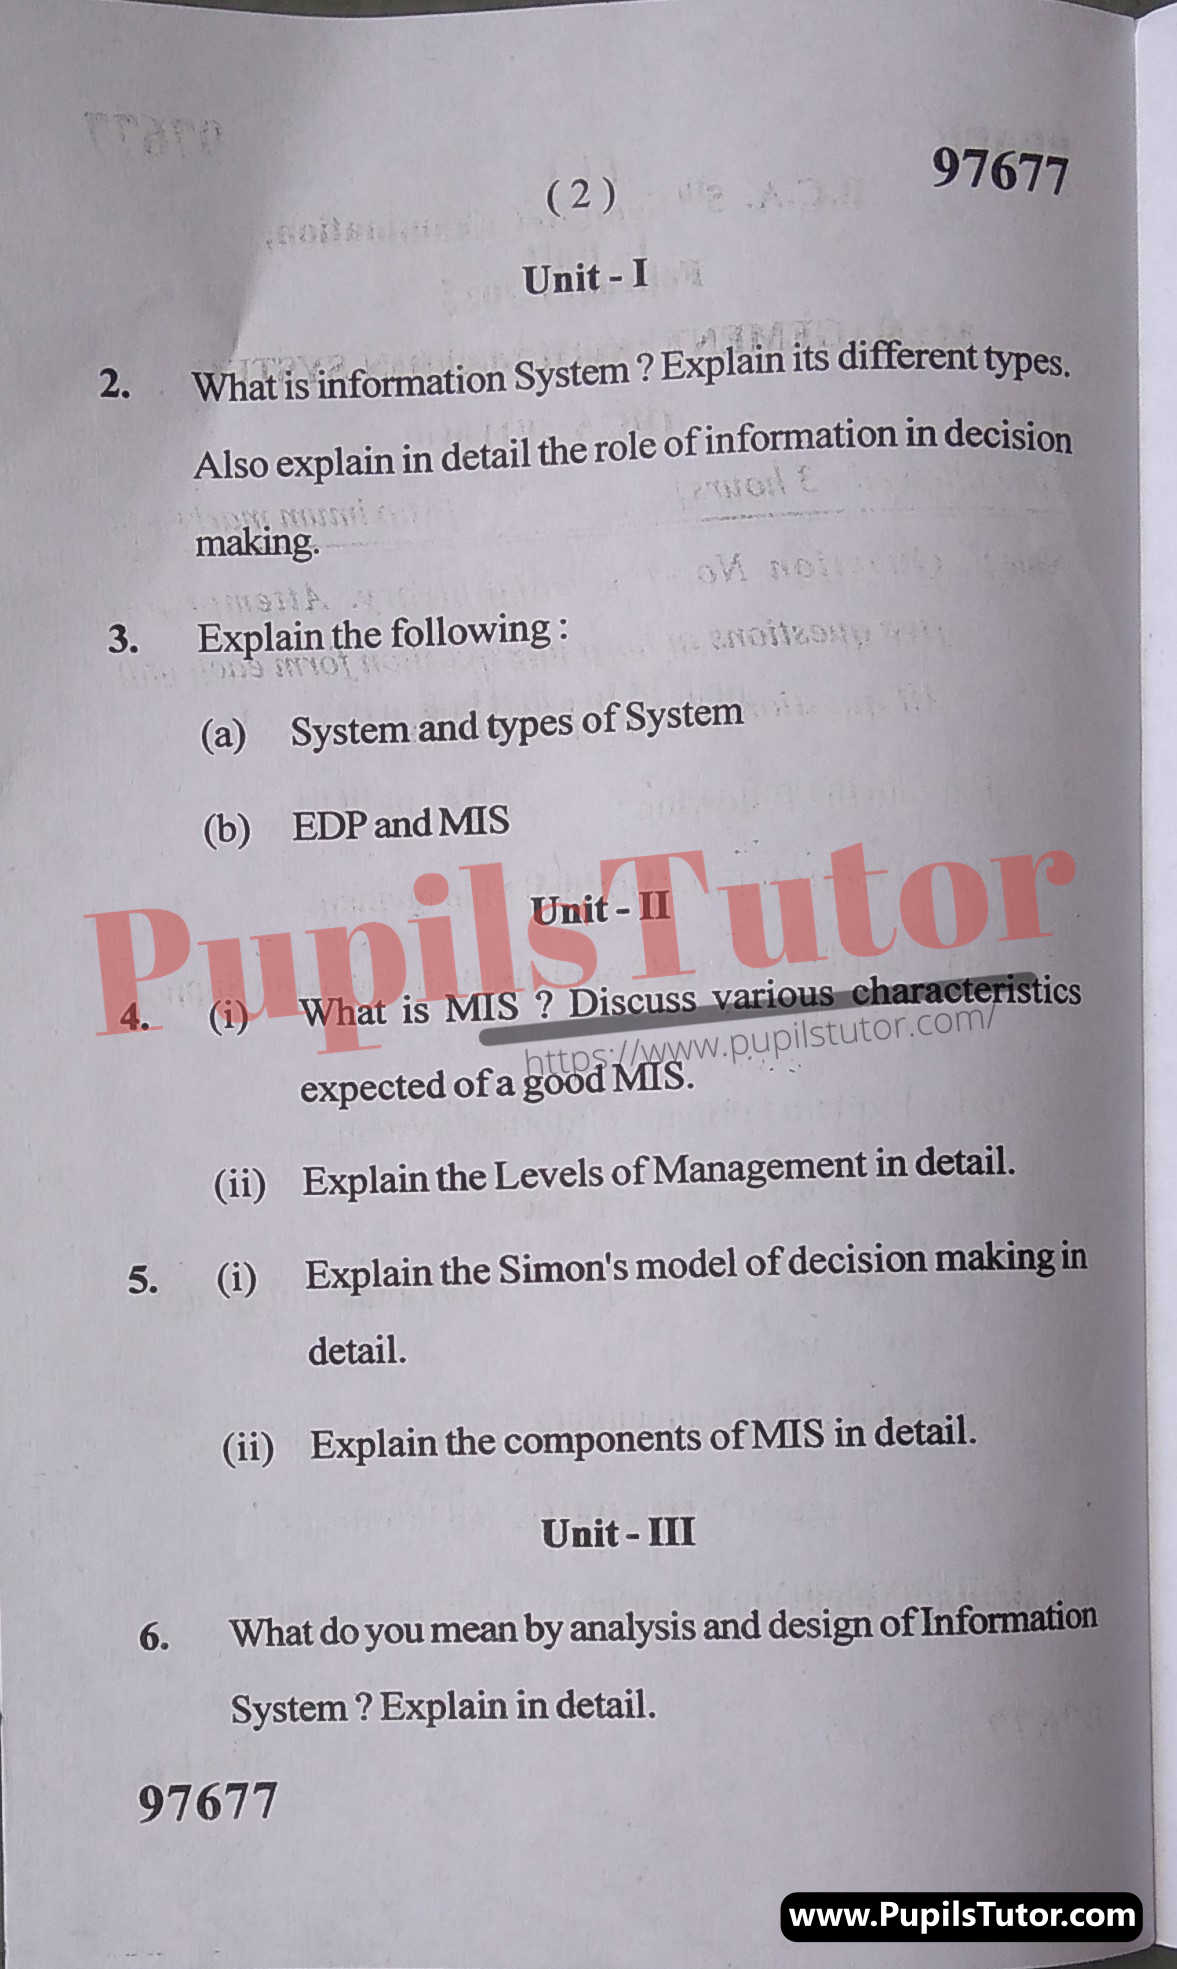 M.D. University B.C.A Management Information System (BCA-301) 5th Semester Important Question Answer And Solution - www.pupilstutor.com (Paper Page Number 2)